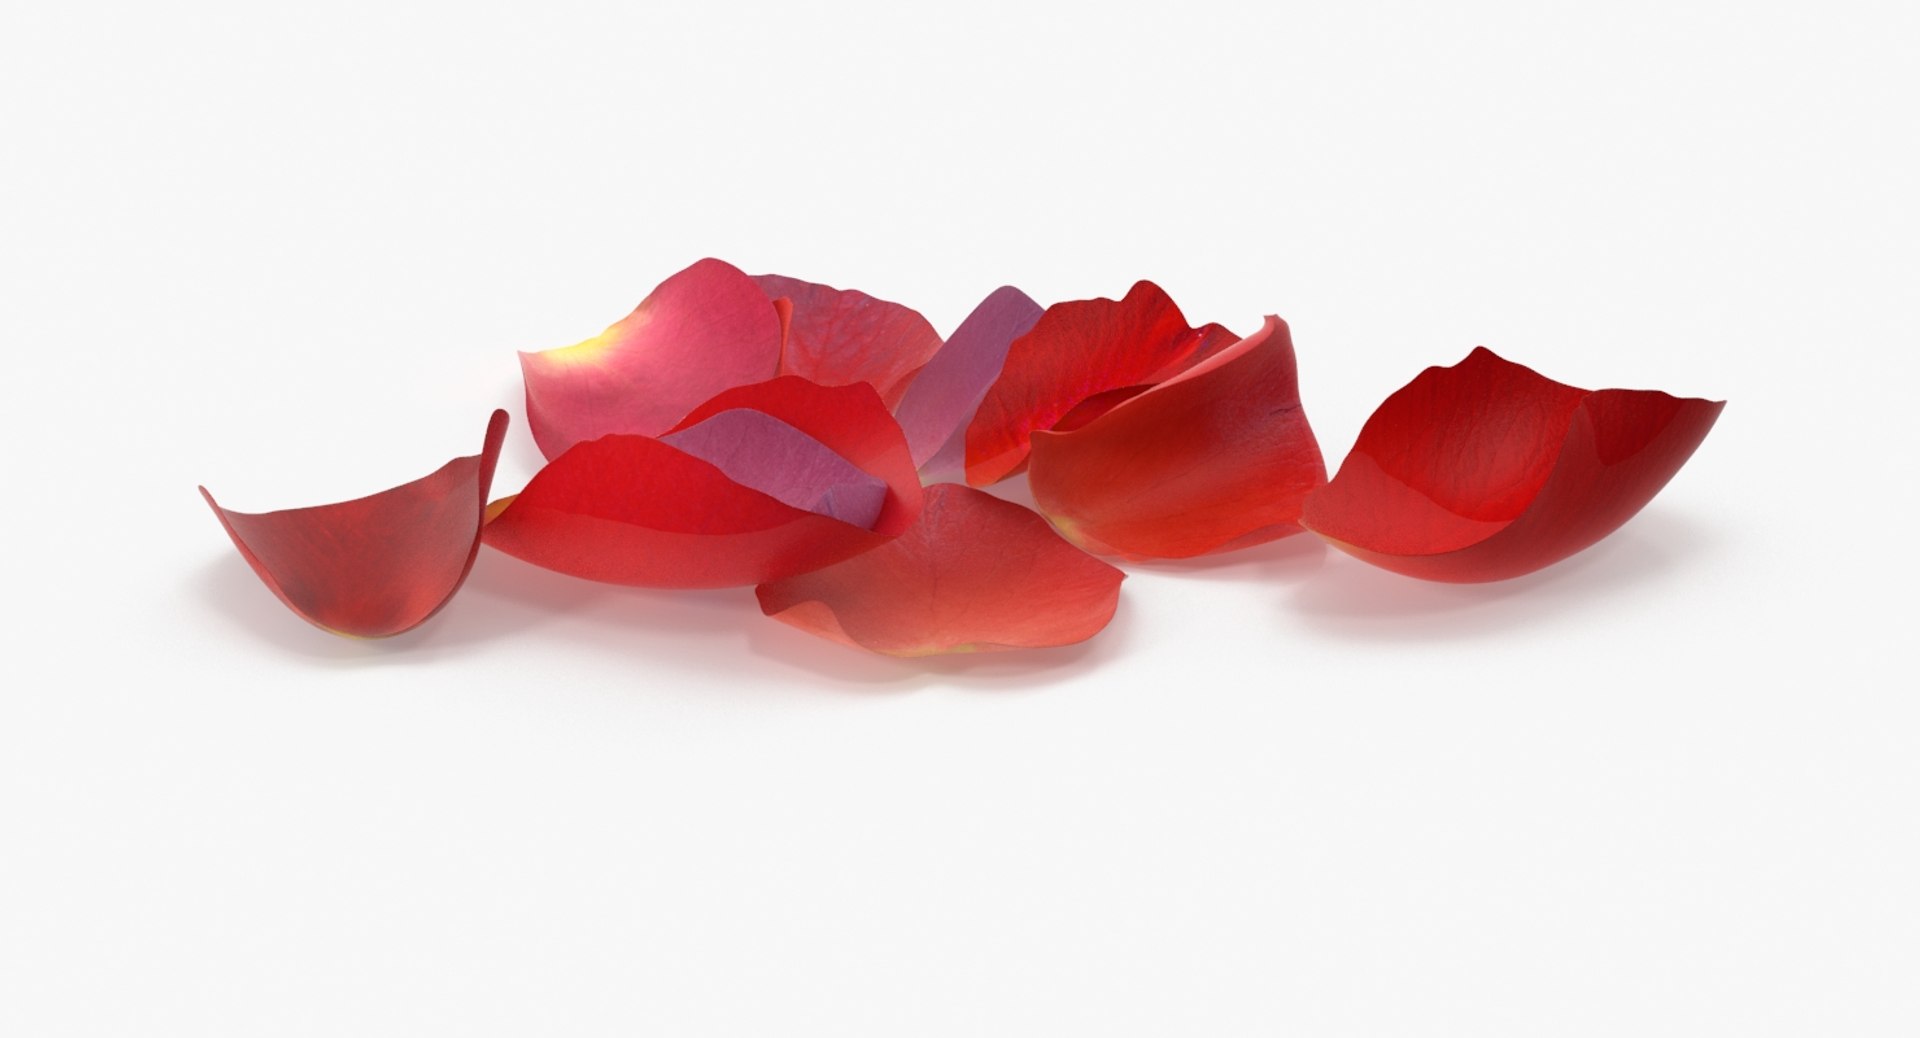 45,284 Rose Petal Outline Images, Stock Photos, 3D objects